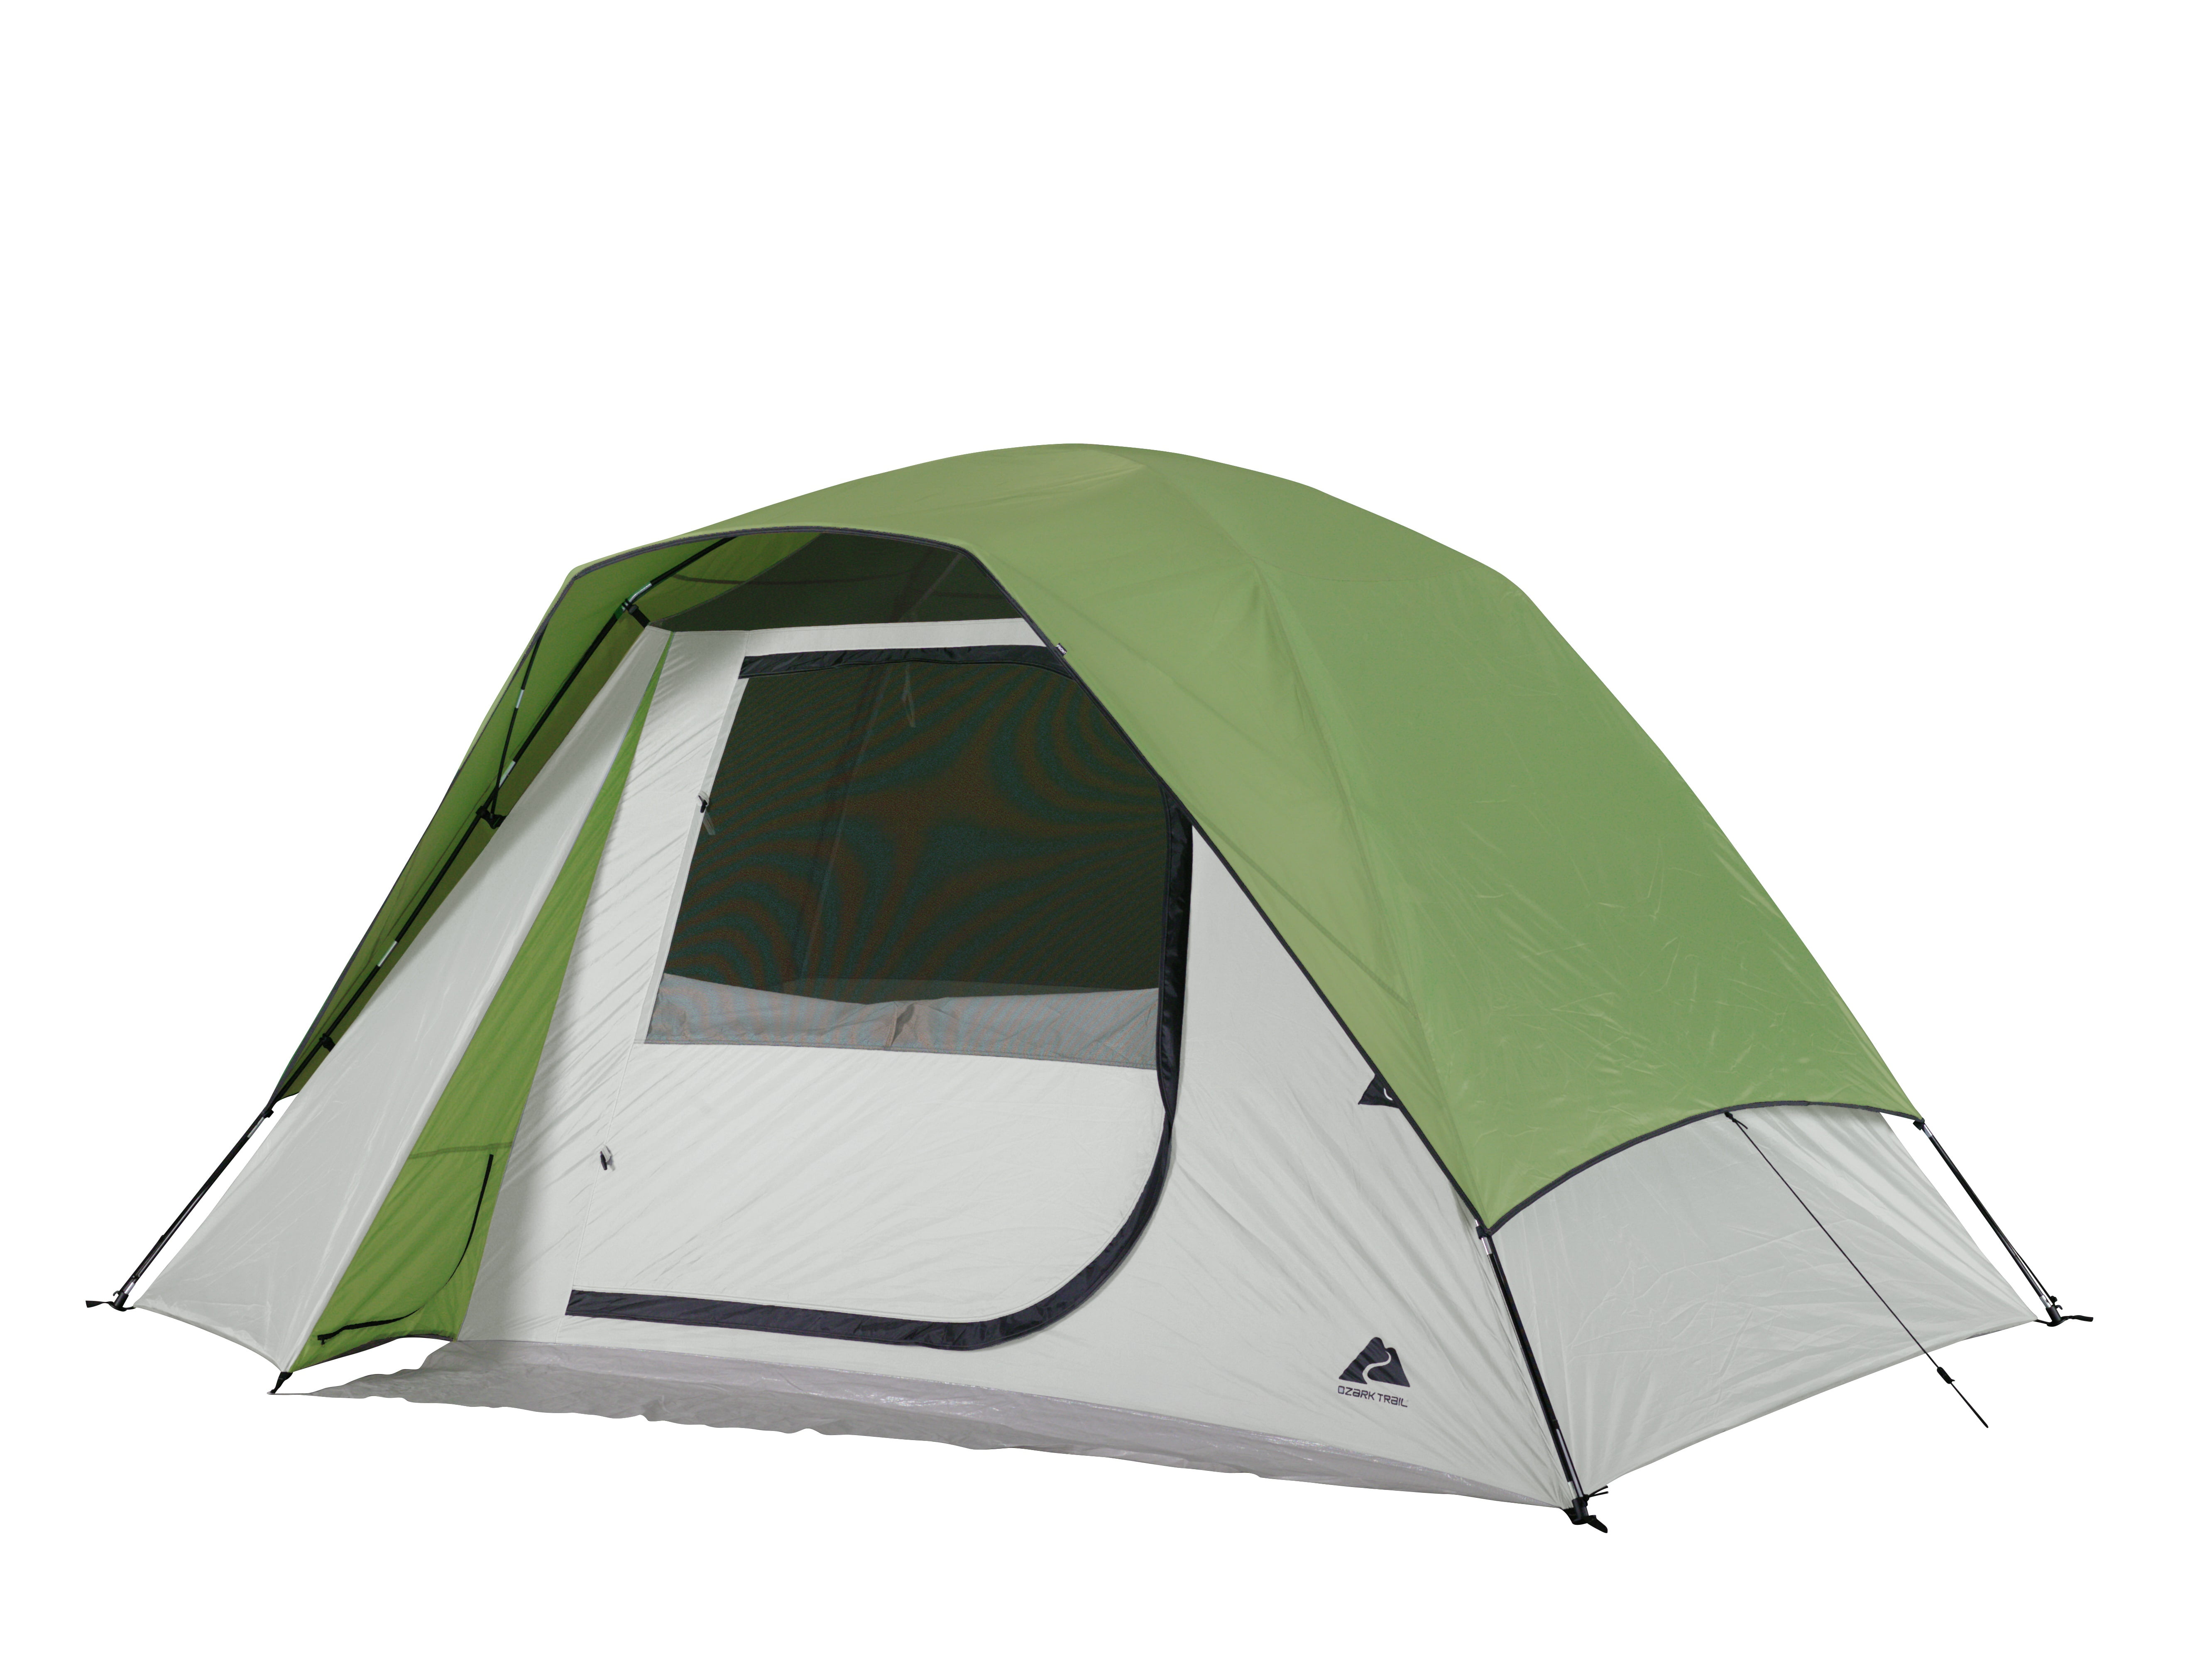 2-Layer Camping Tent 6/8 Person with Porch Gonex 4/6 Man Tent PU3000mm Waterproof Family Tent with Divided Curtain for Separated Room Portable with Carry Bag Windproof Outdoor Tunnel Tent